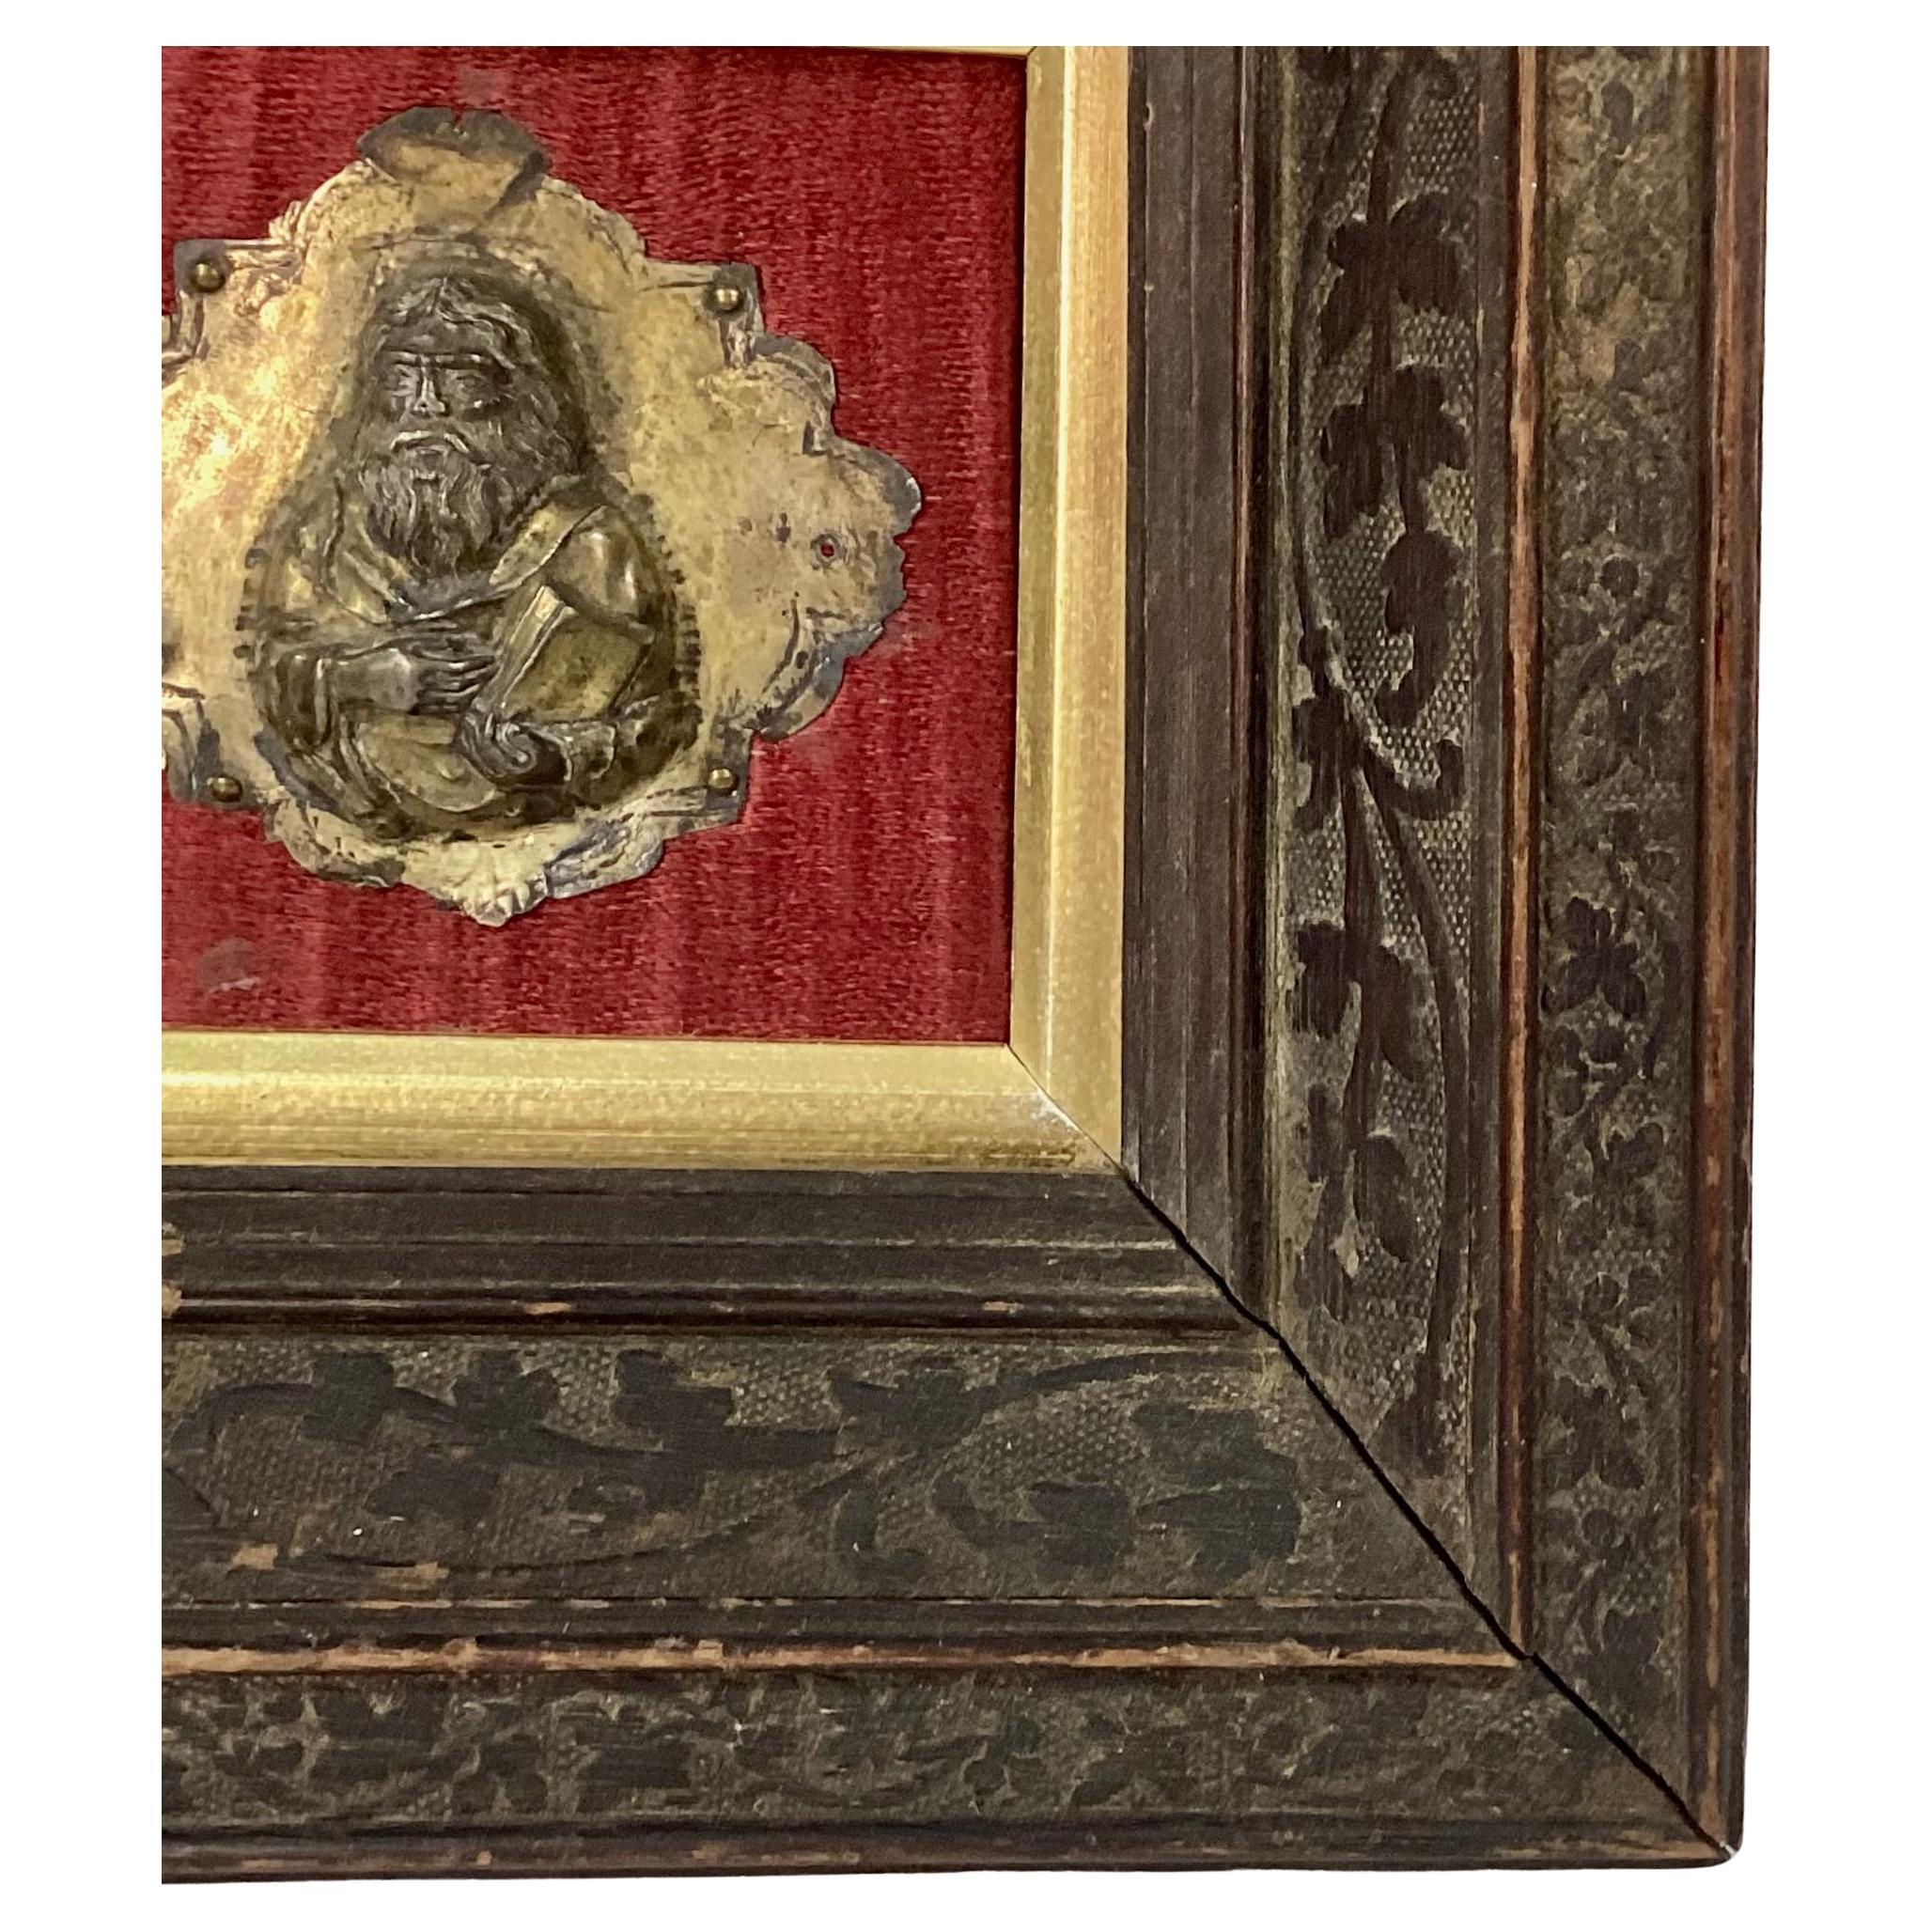 Pair Of 16th Century Gilt Silver Saints, Framed In Good Condition For Sale In Bradenton, FL